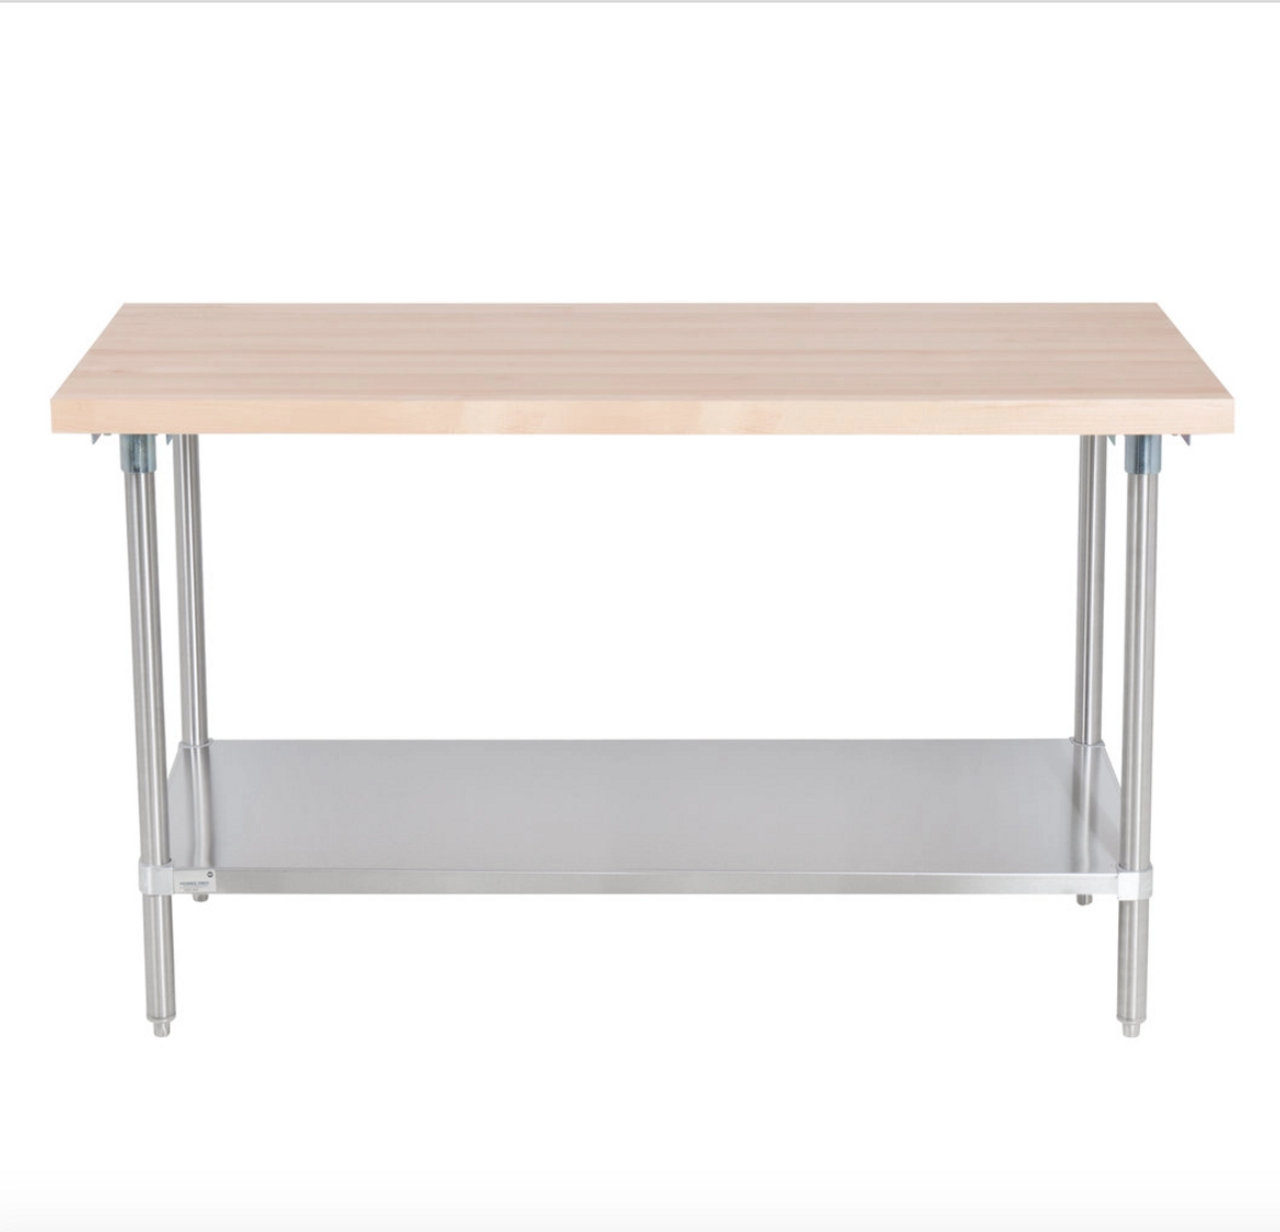 Wood Top Work Table with Stainless Steel Base and Undershelf - 30" x 60"